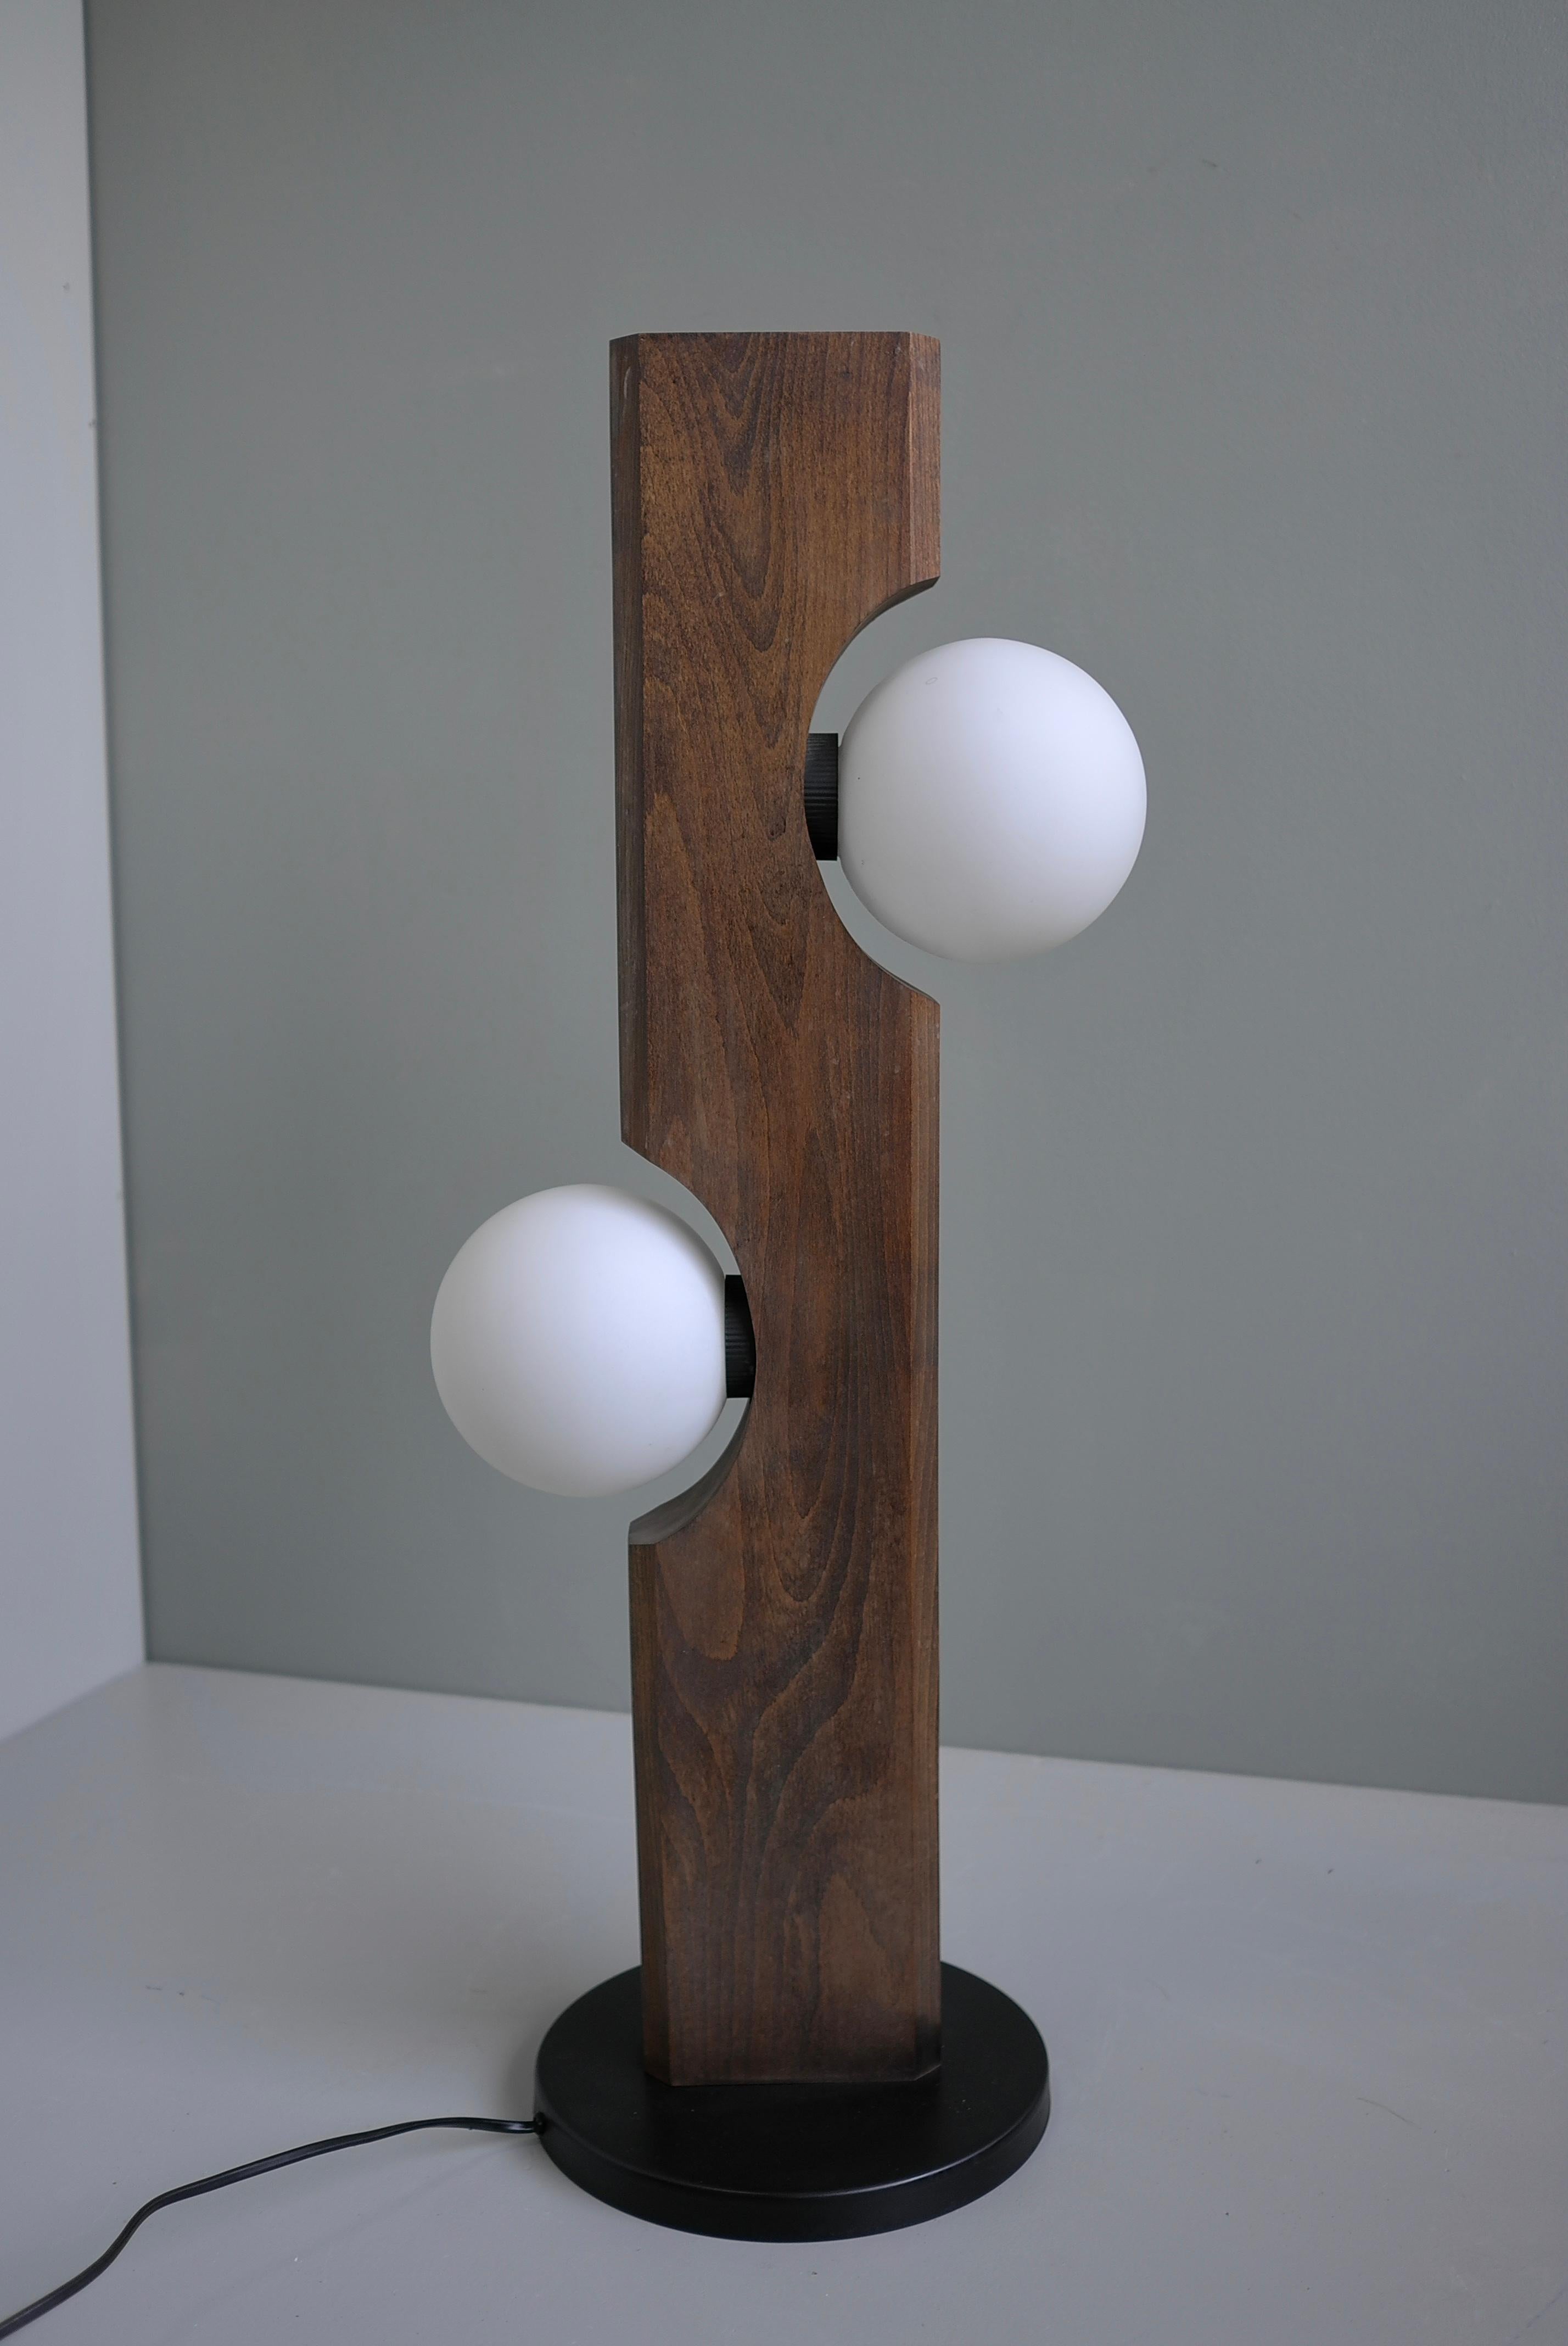 Temde Leuchten Floor or Table Lamp in Wood with White Glass Balls, Germany 1969 For Sale 4